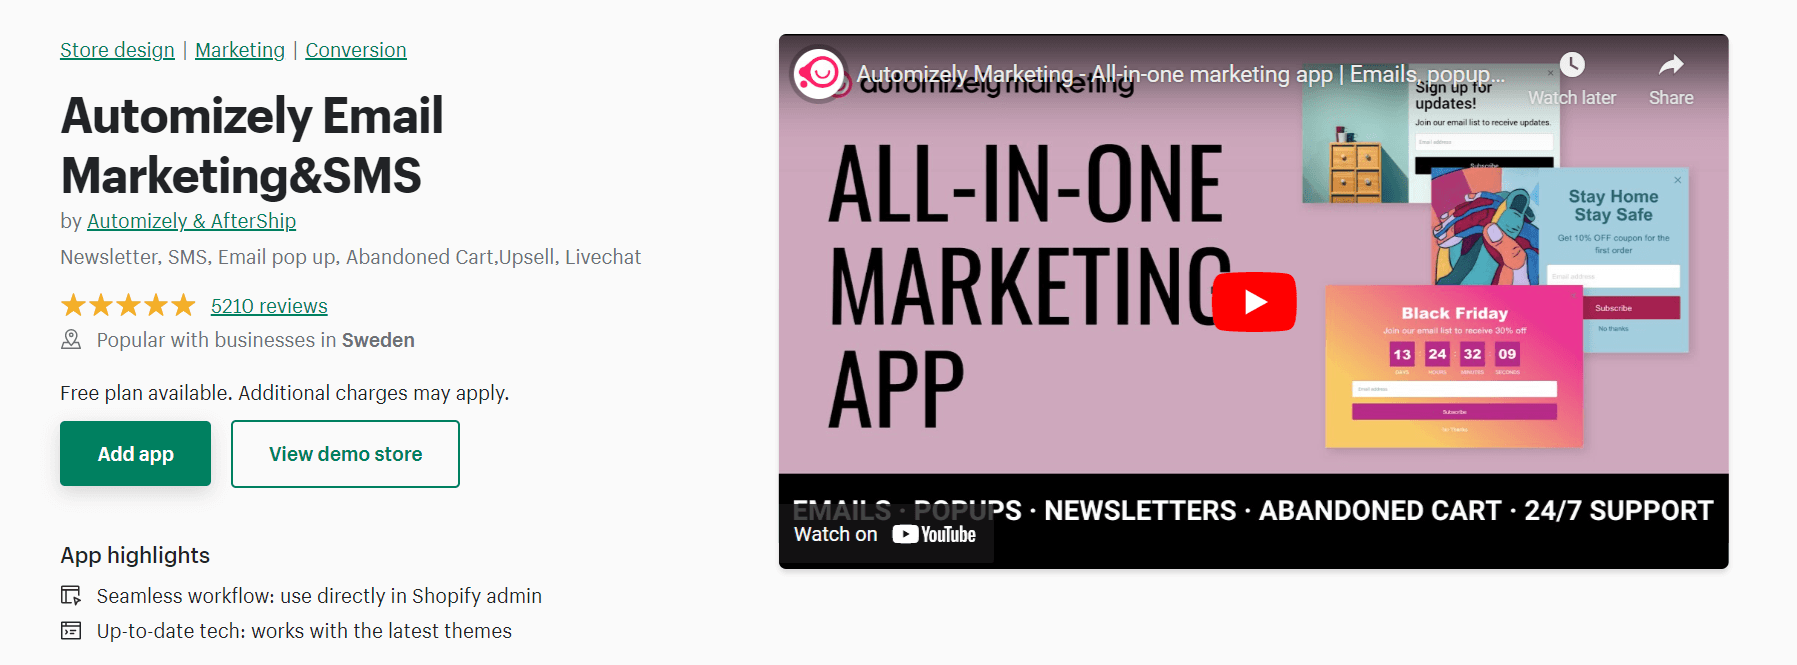 Automizely app for email marketing and SMS